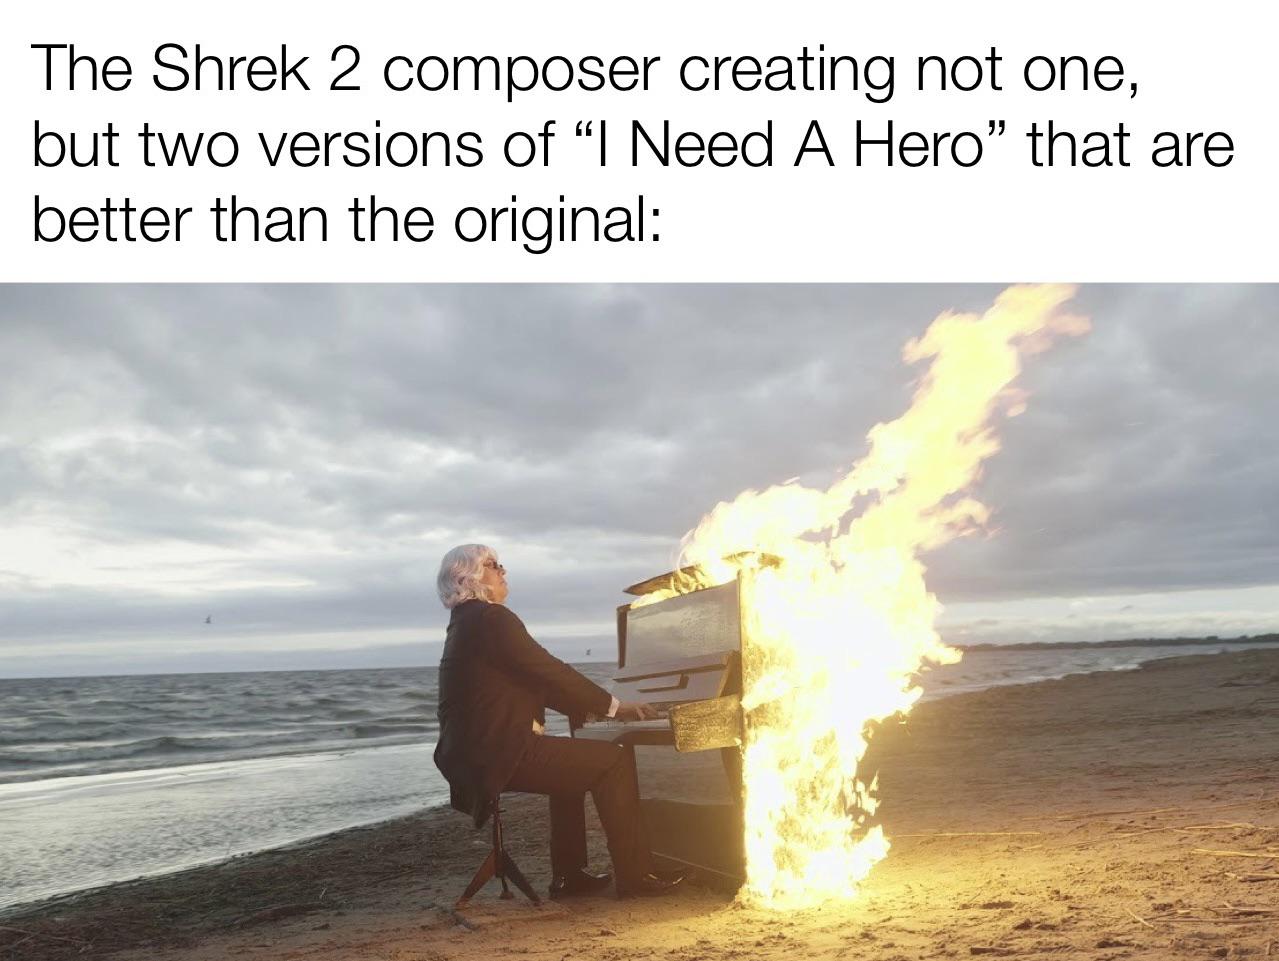 dank memes - heat - The Shrek 2 composer creating not one, but two versions of "I Need A Hero" that are better than the original